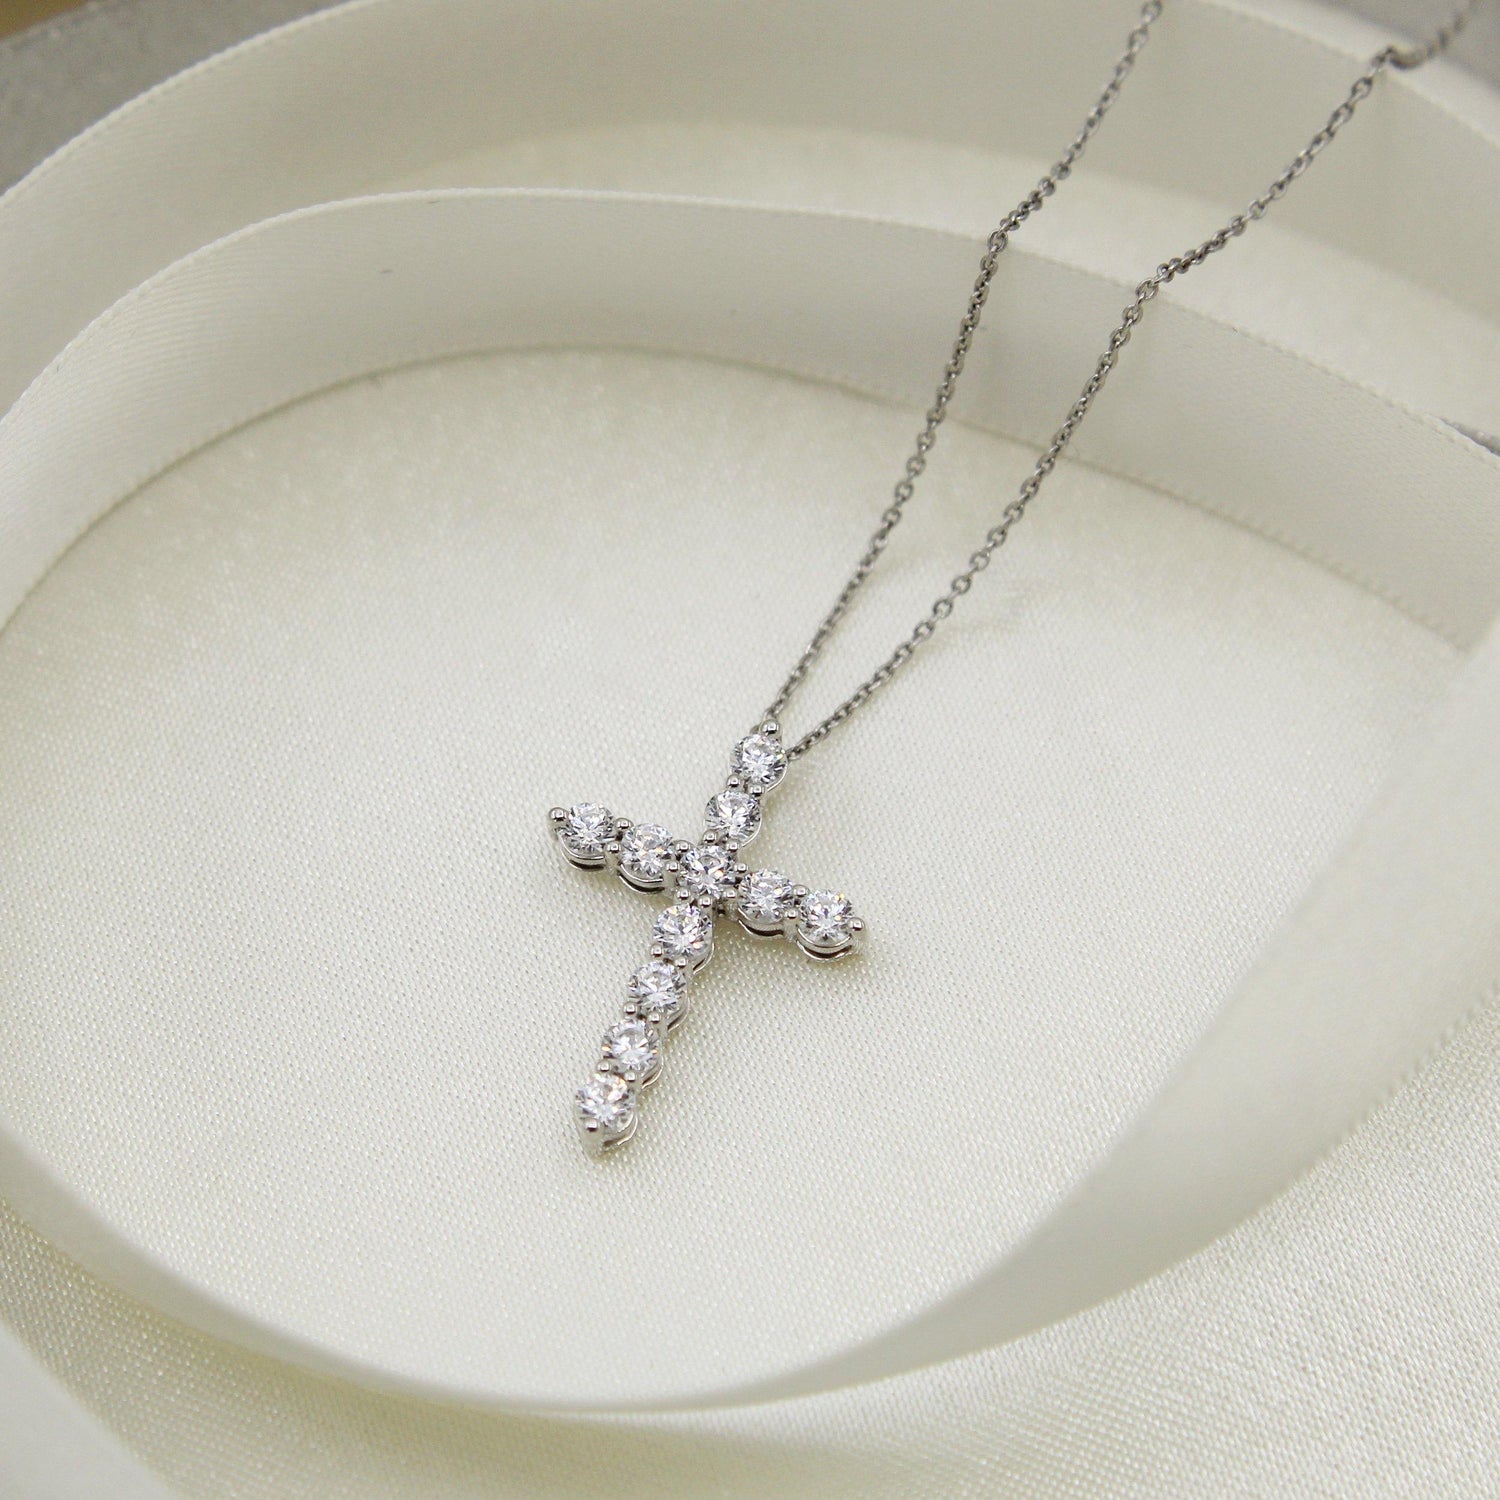  Diamond Cross Pendant in Sterling Silver affordable 